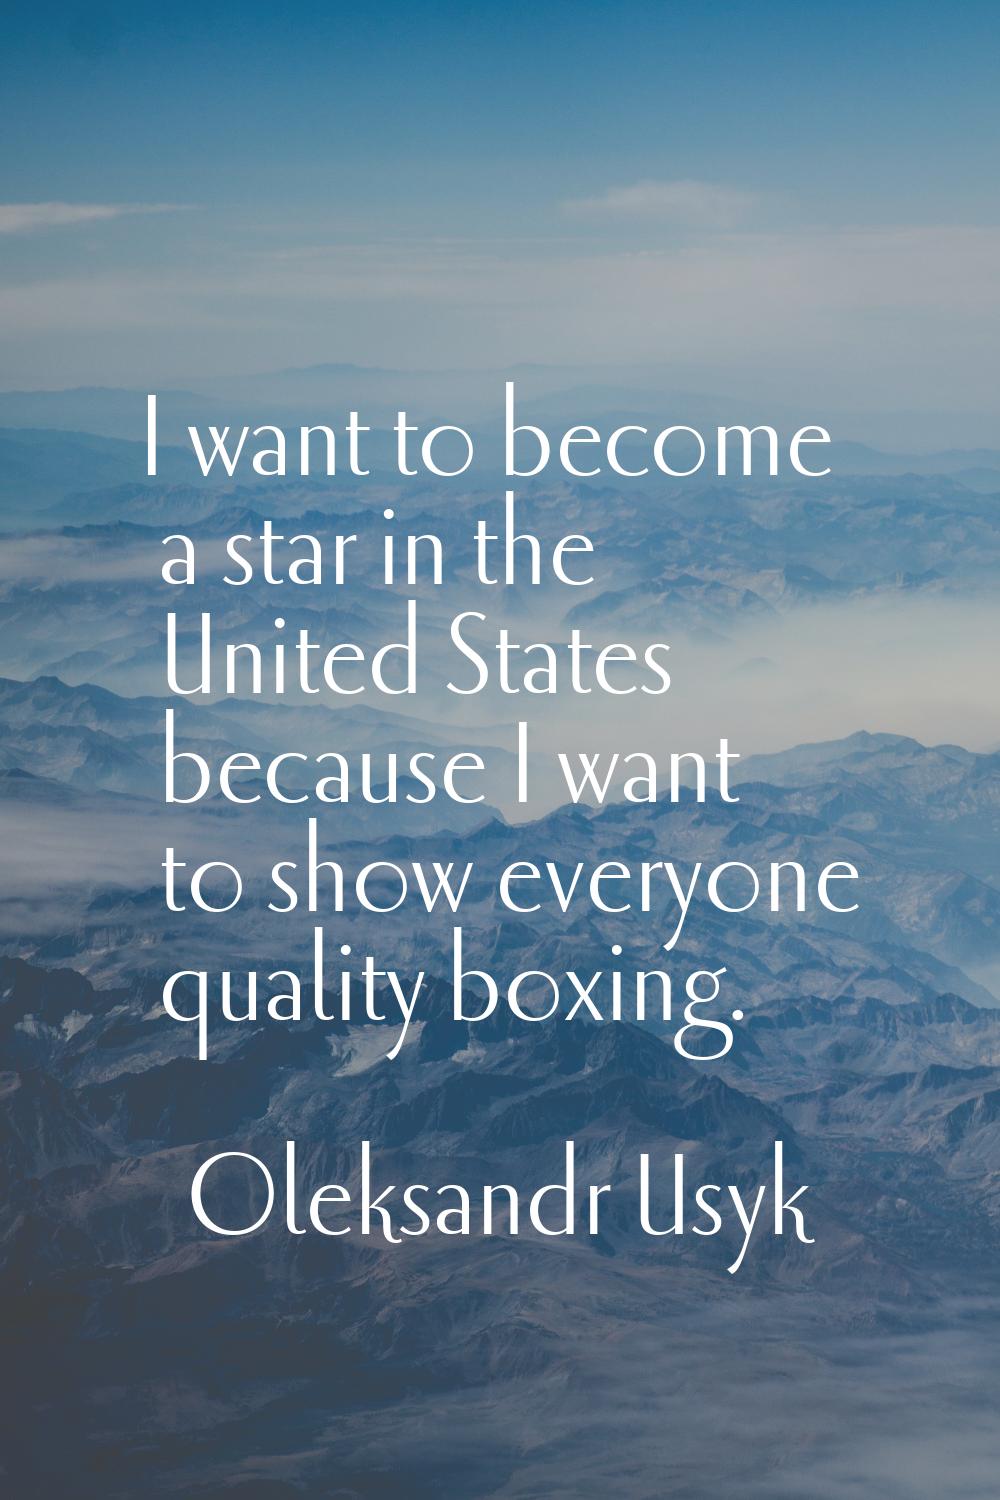 I want to become a star in the United States because I want to show everyone quality boxing.